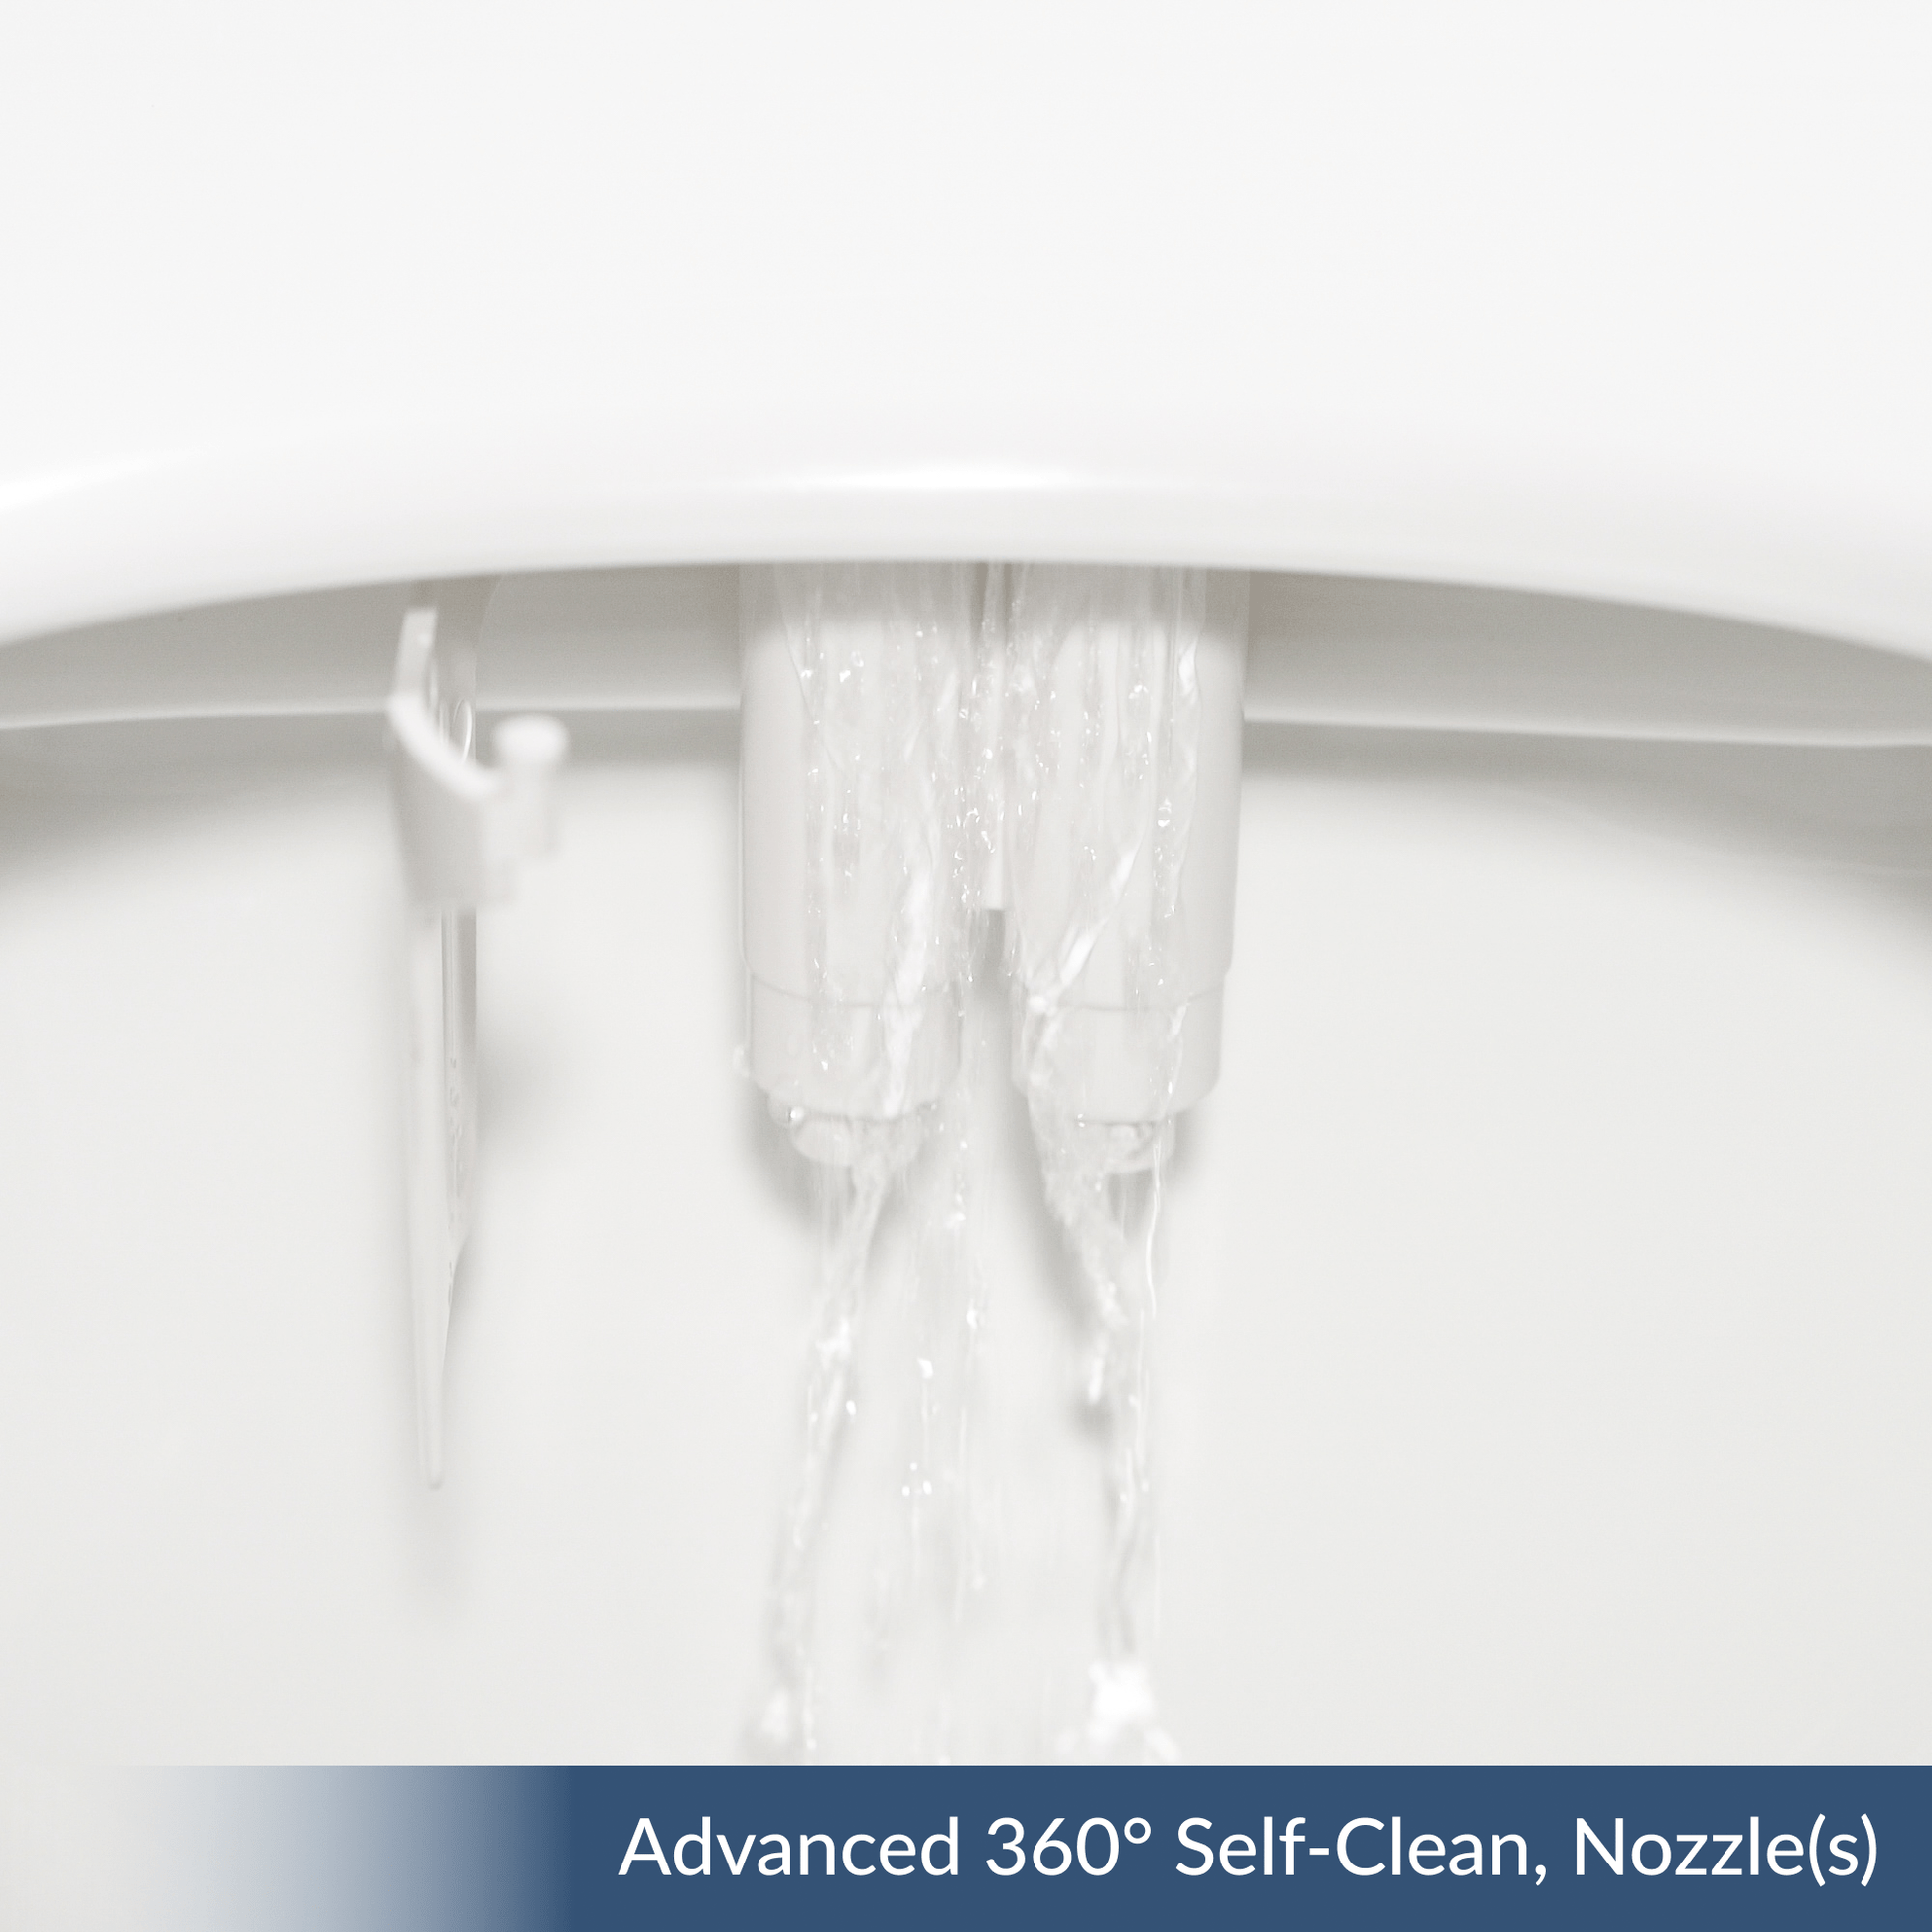 NEO 185 Plus: Imperfect Packaging - Advanced 360° Self-Clean feature of NEO Plus series runs water down the nozzles to clean them